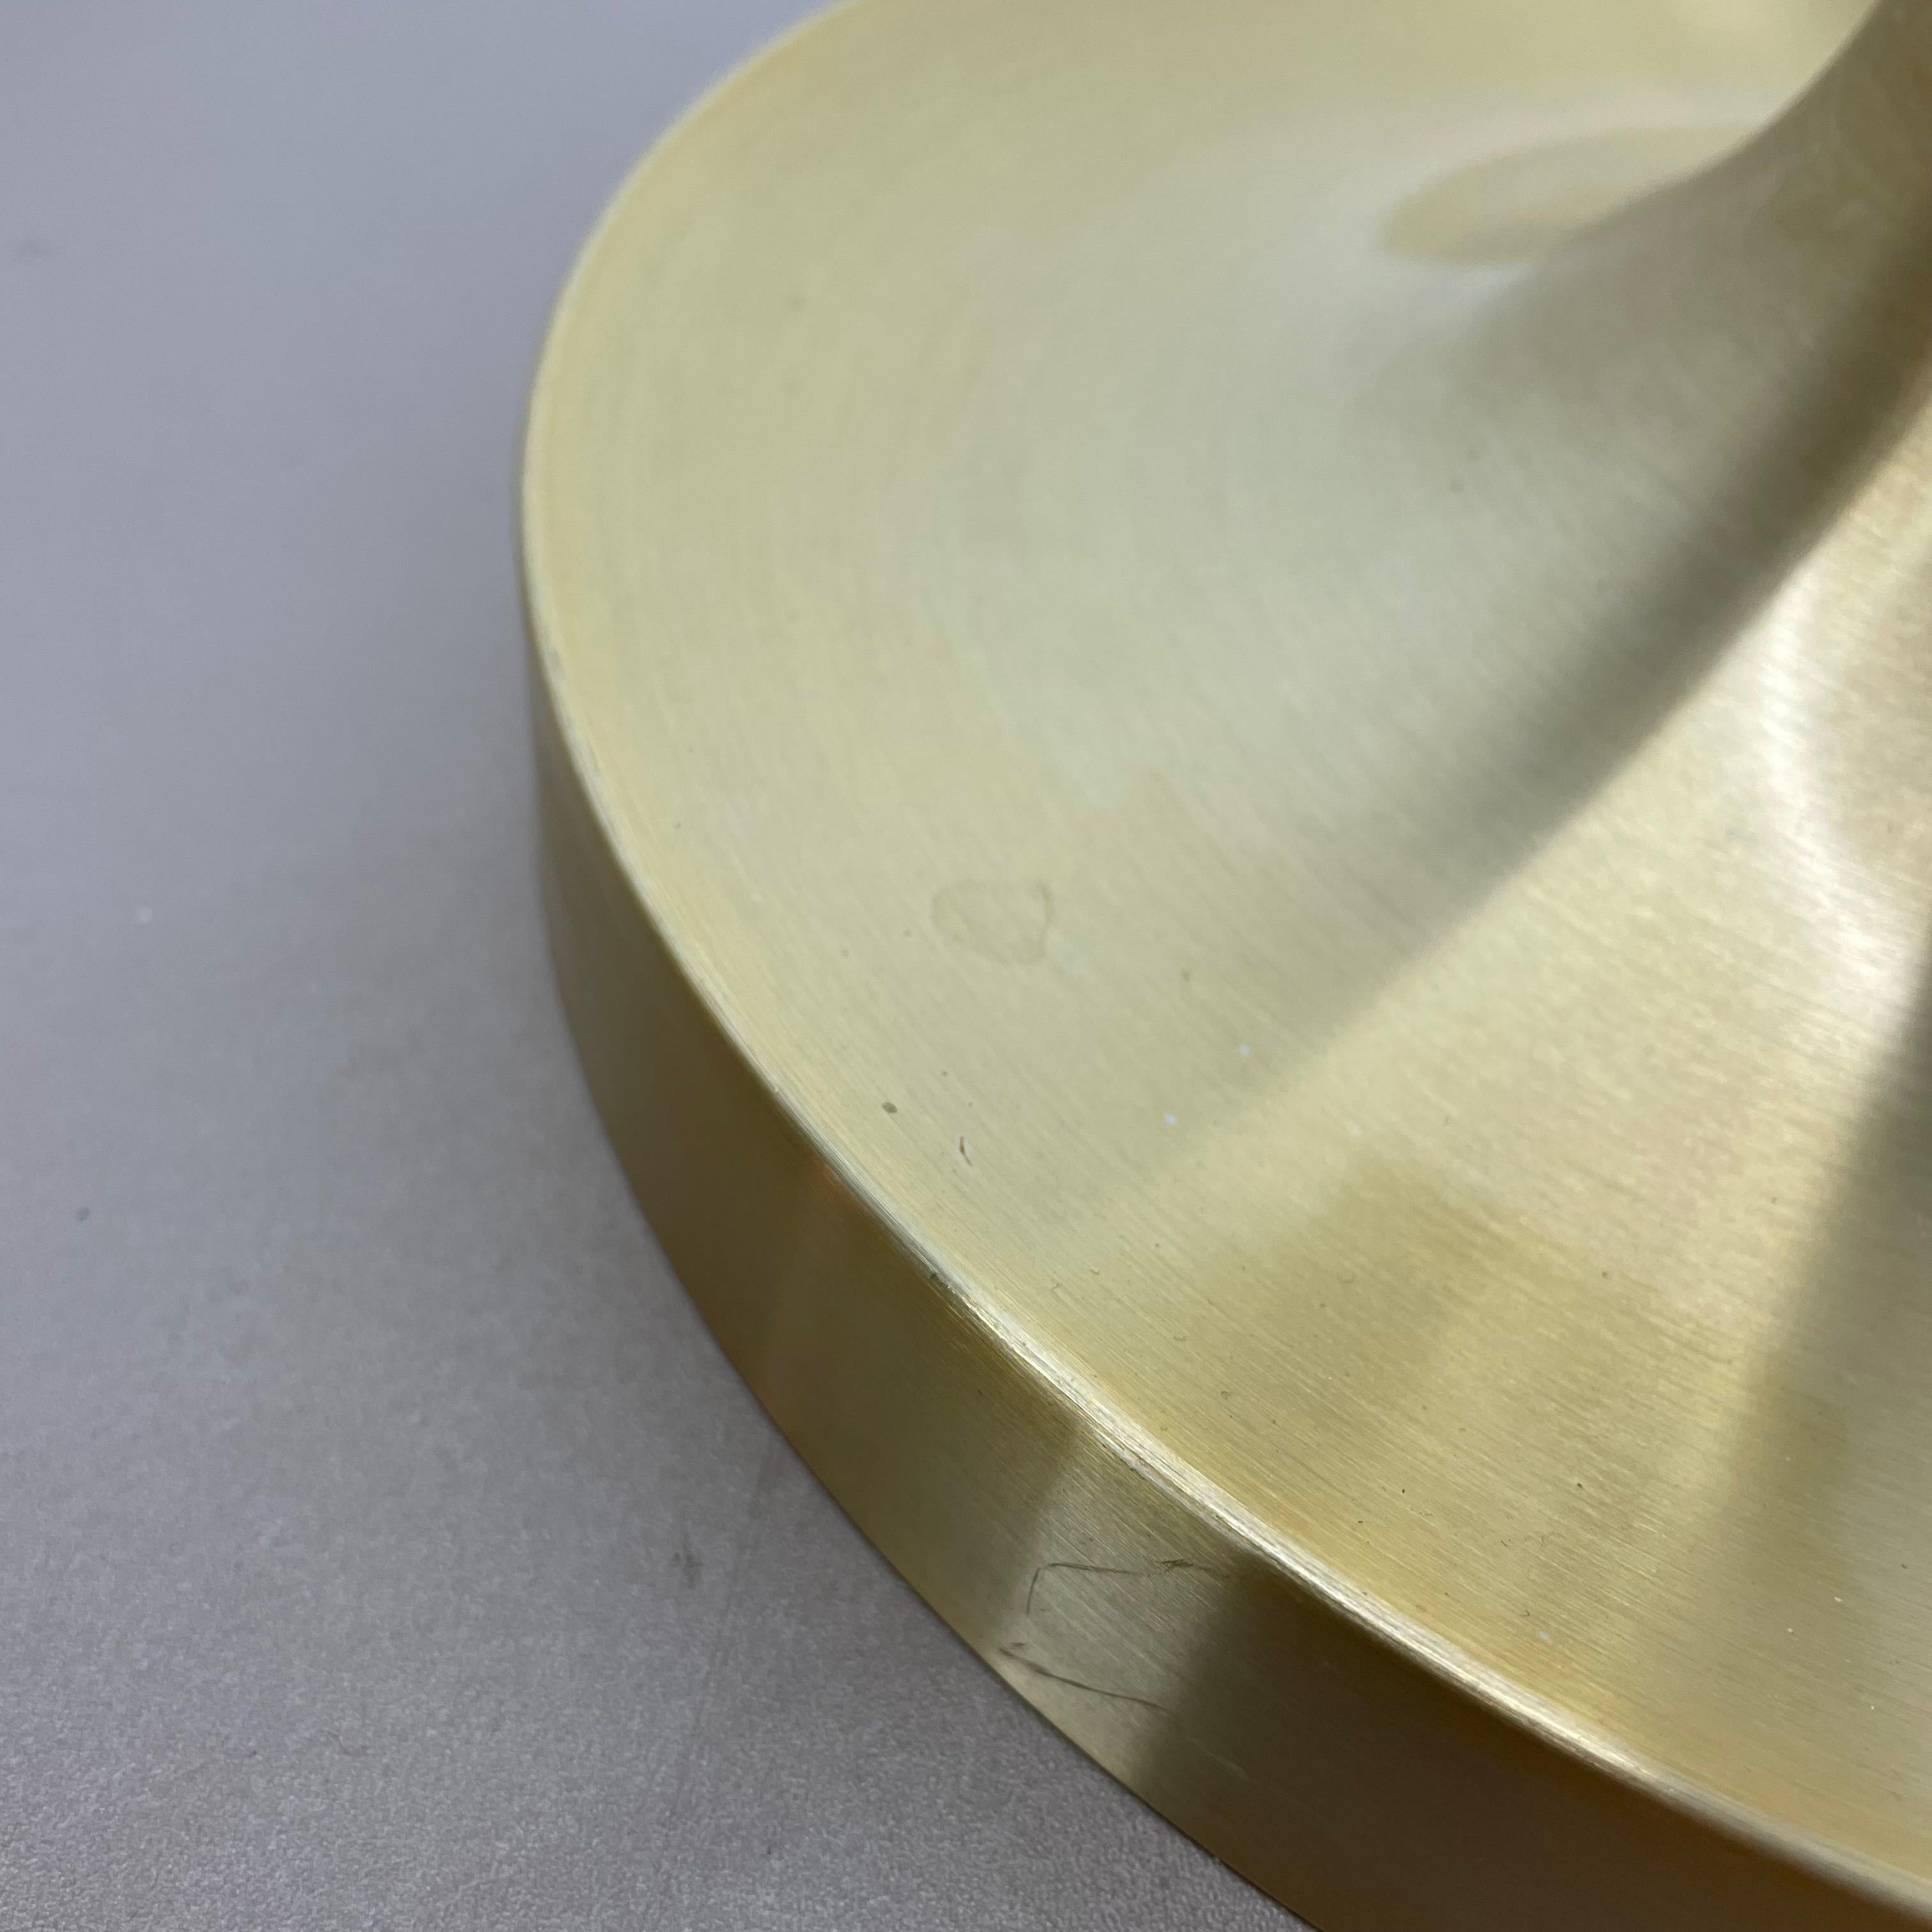 Rare Golden Charlotte Perriand Disc Wall Light by Honsel, Germany 1960s For Sale 5